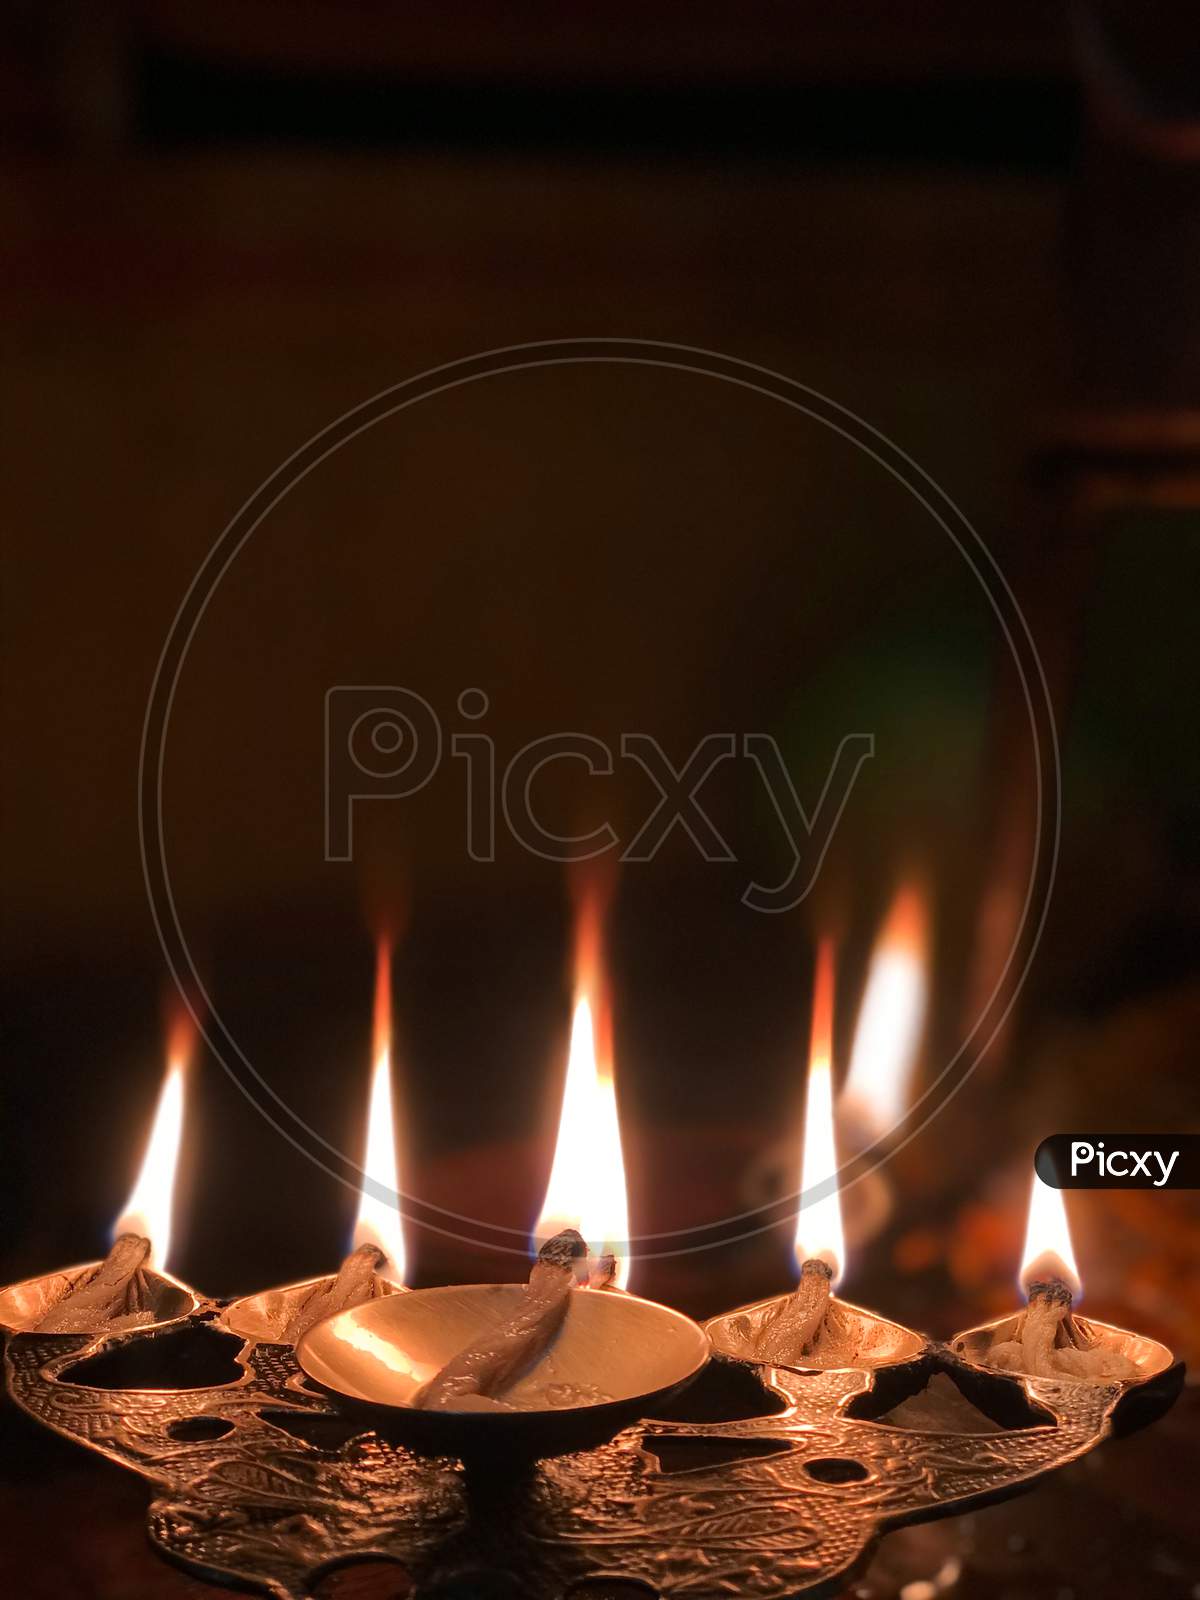 Burning Lamp Or Diya During Hindu Rituals Flame Called Aarti. Shiva Aarti Pic. Aarti Flame Given To The Gods At Night Time. Shivaratri Special Pic.